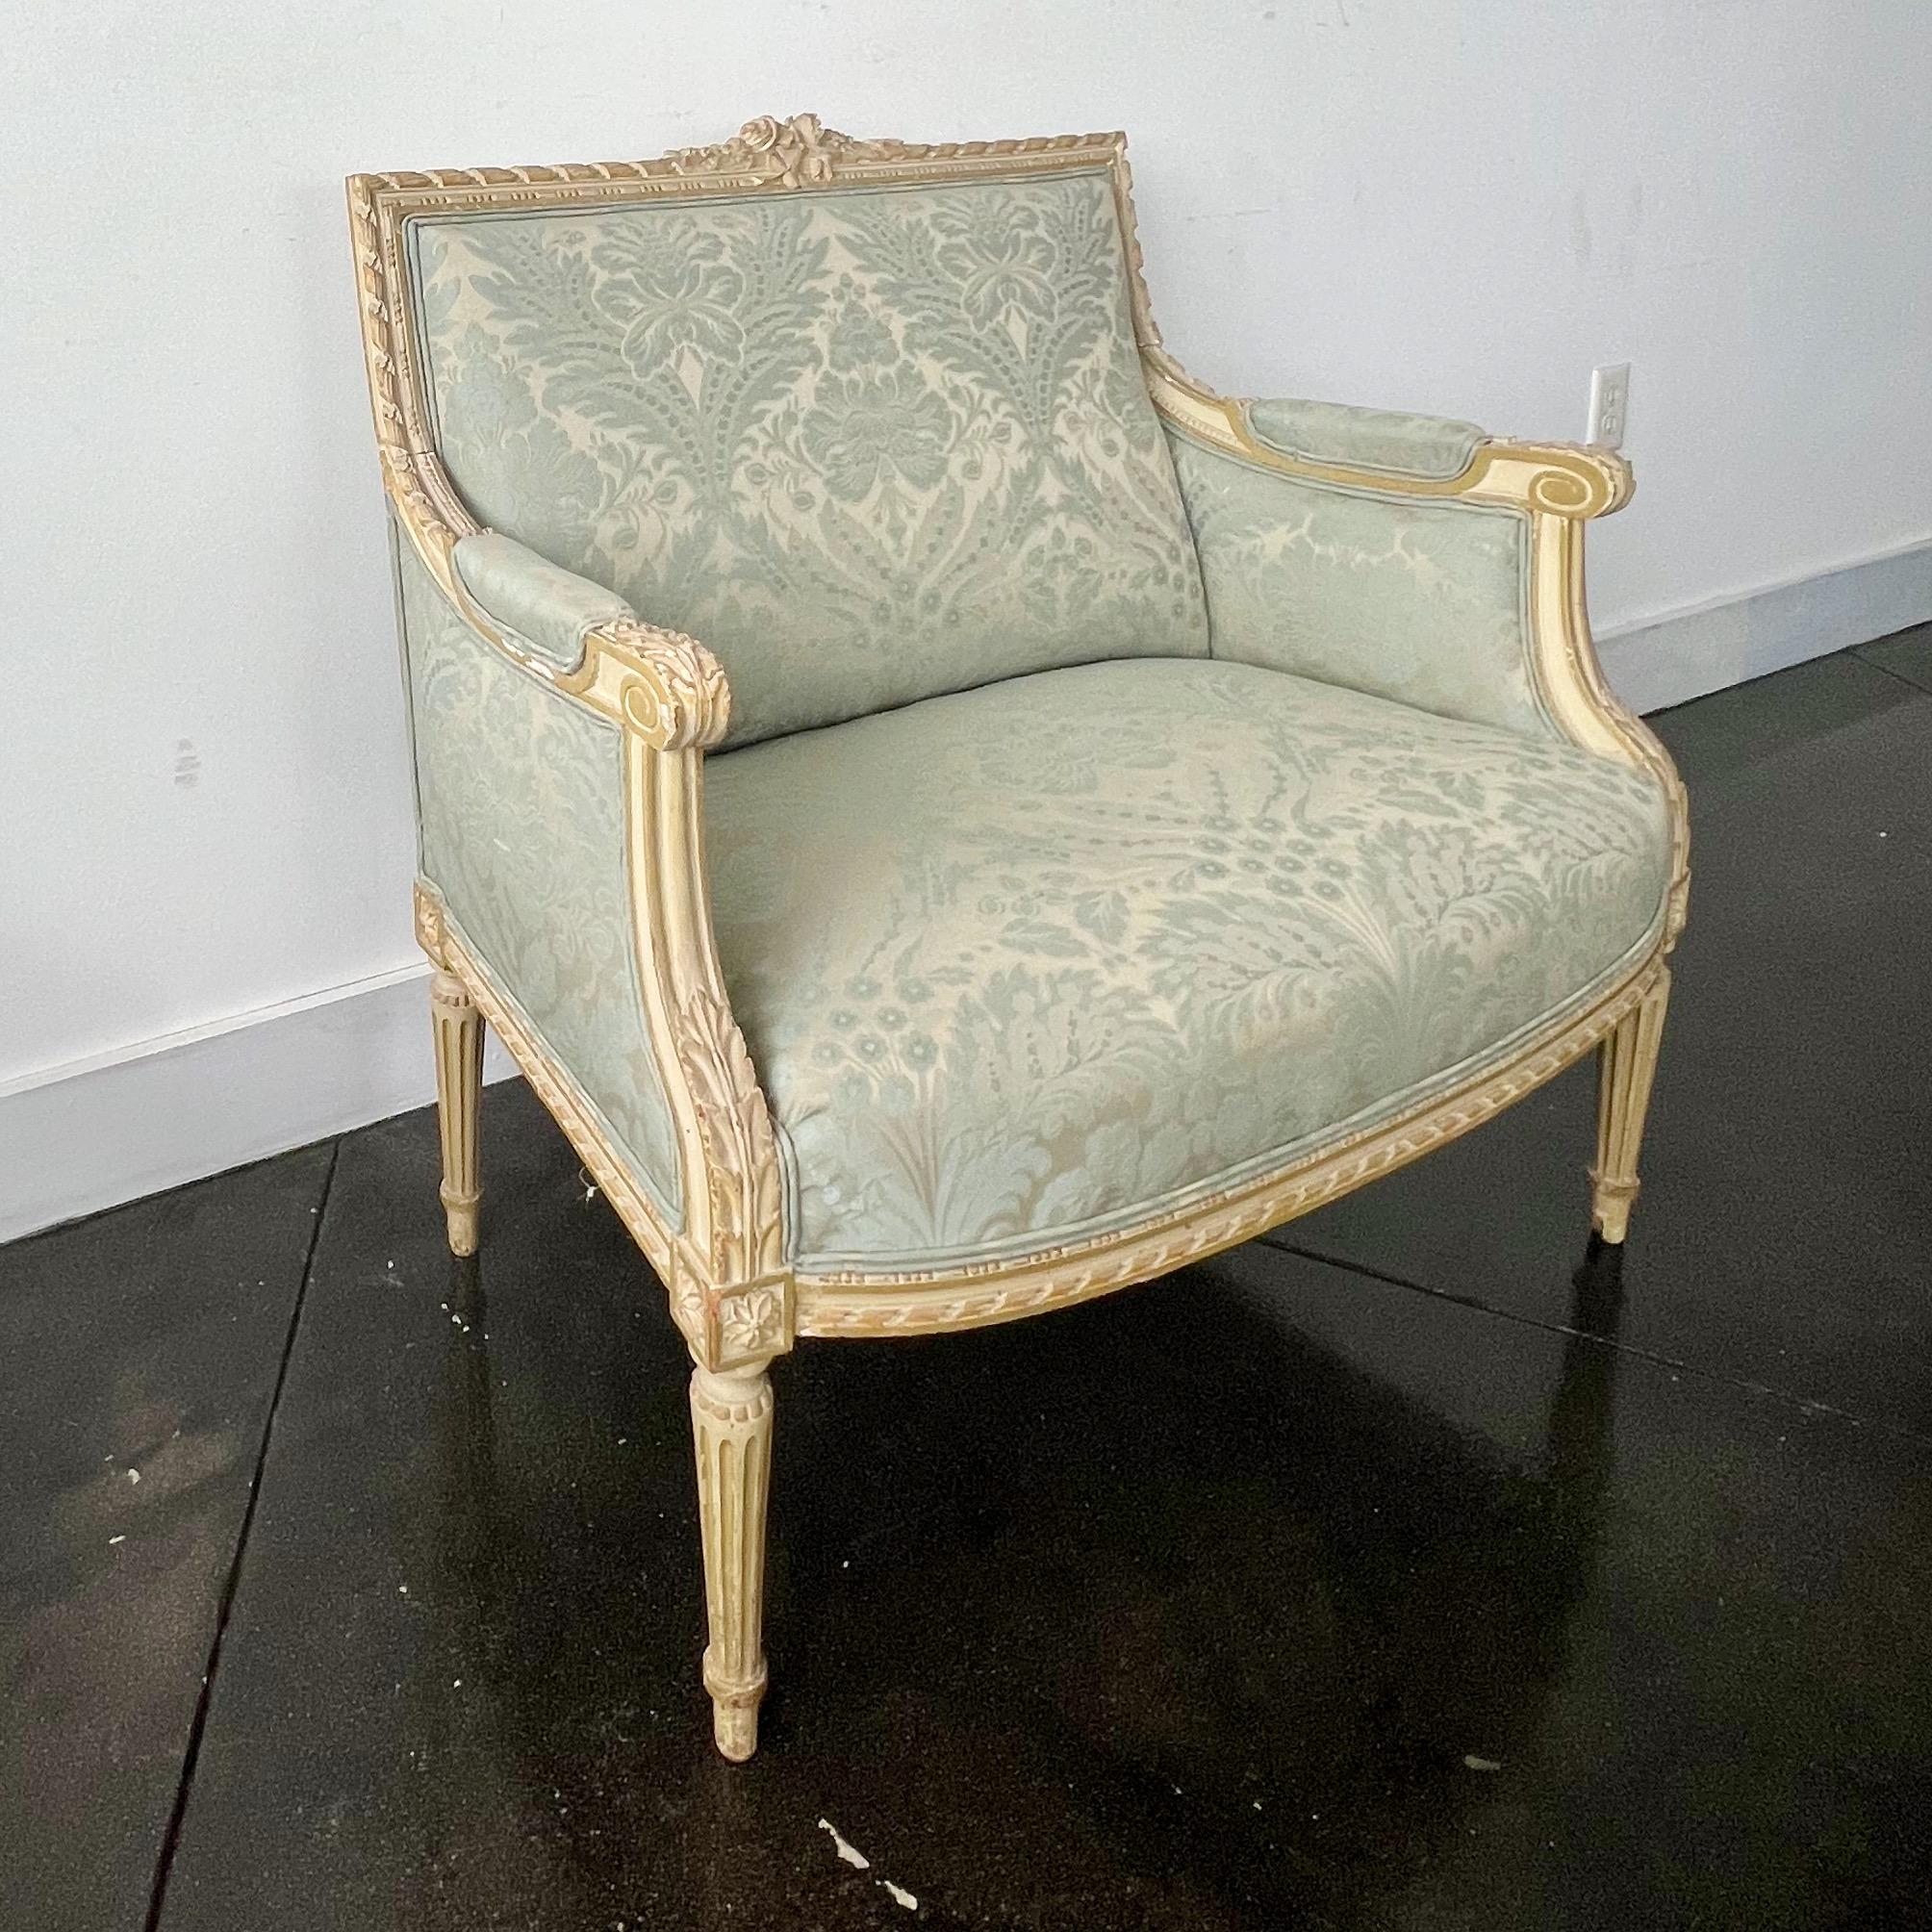 19th Century French Louis XVI Style Oversized Bergere Marquise Armchair For Sale 1